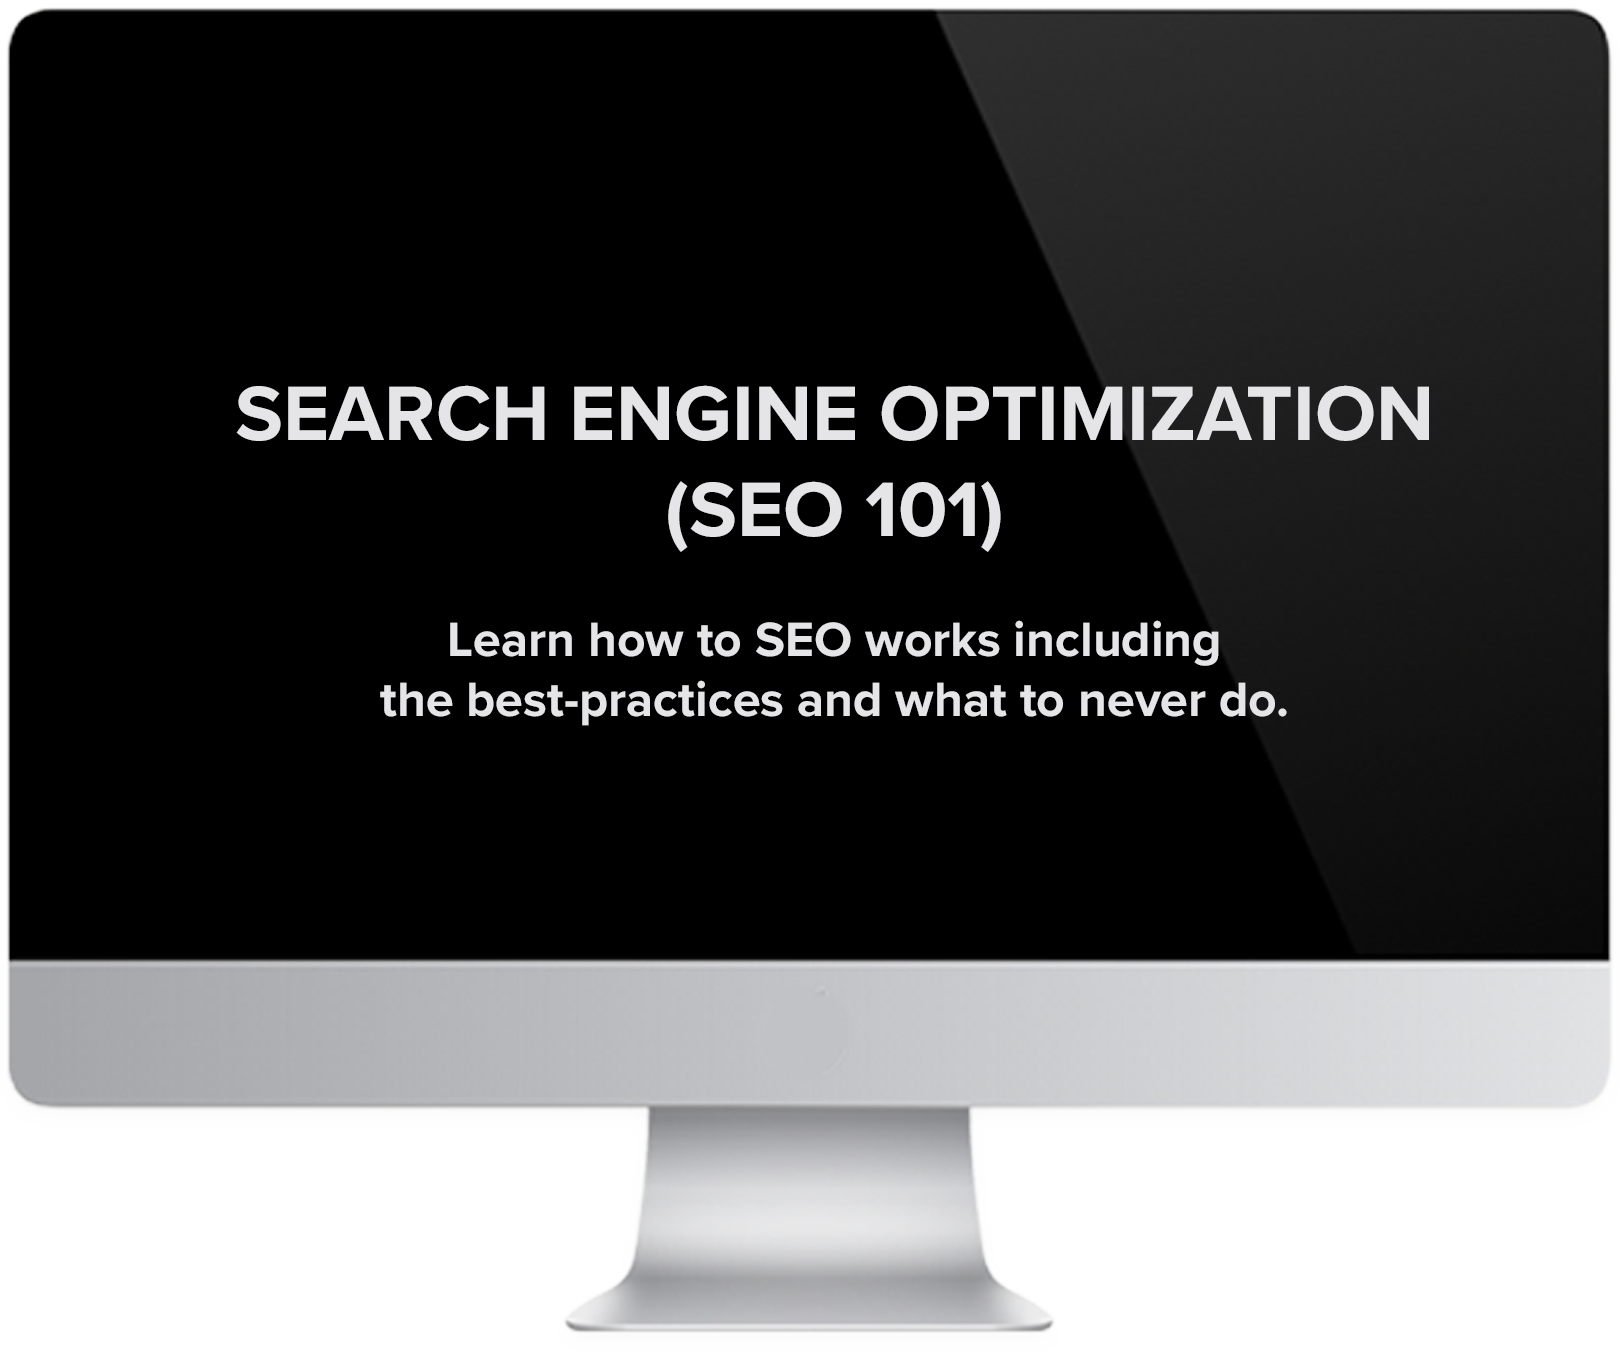 Learn best practices in this SEO 101 training program